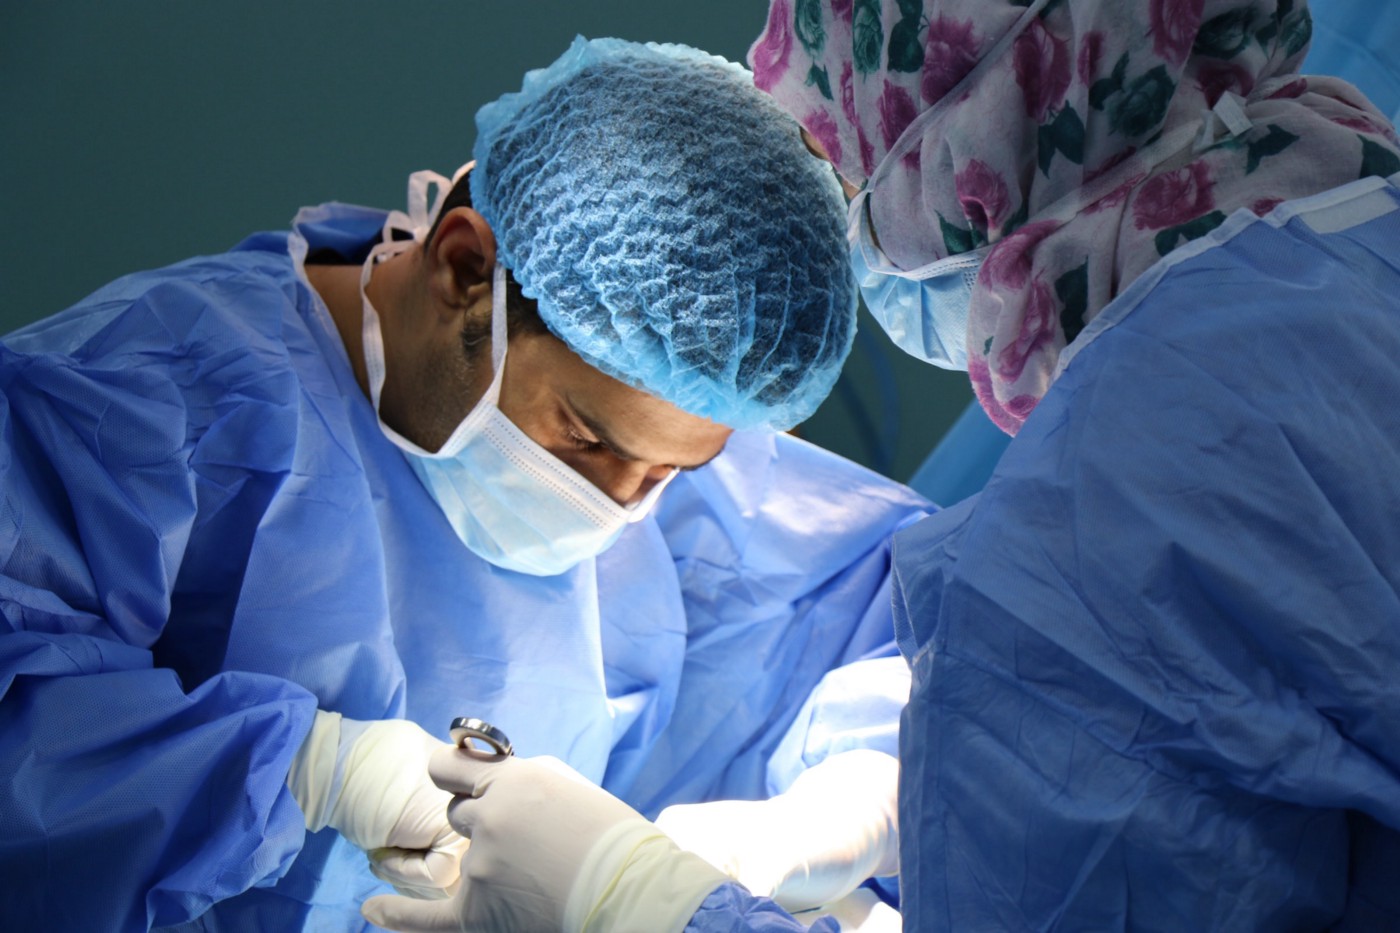 A Surgeon’s Notes on Confidence; What it Really is and How to Get the Right Kind.